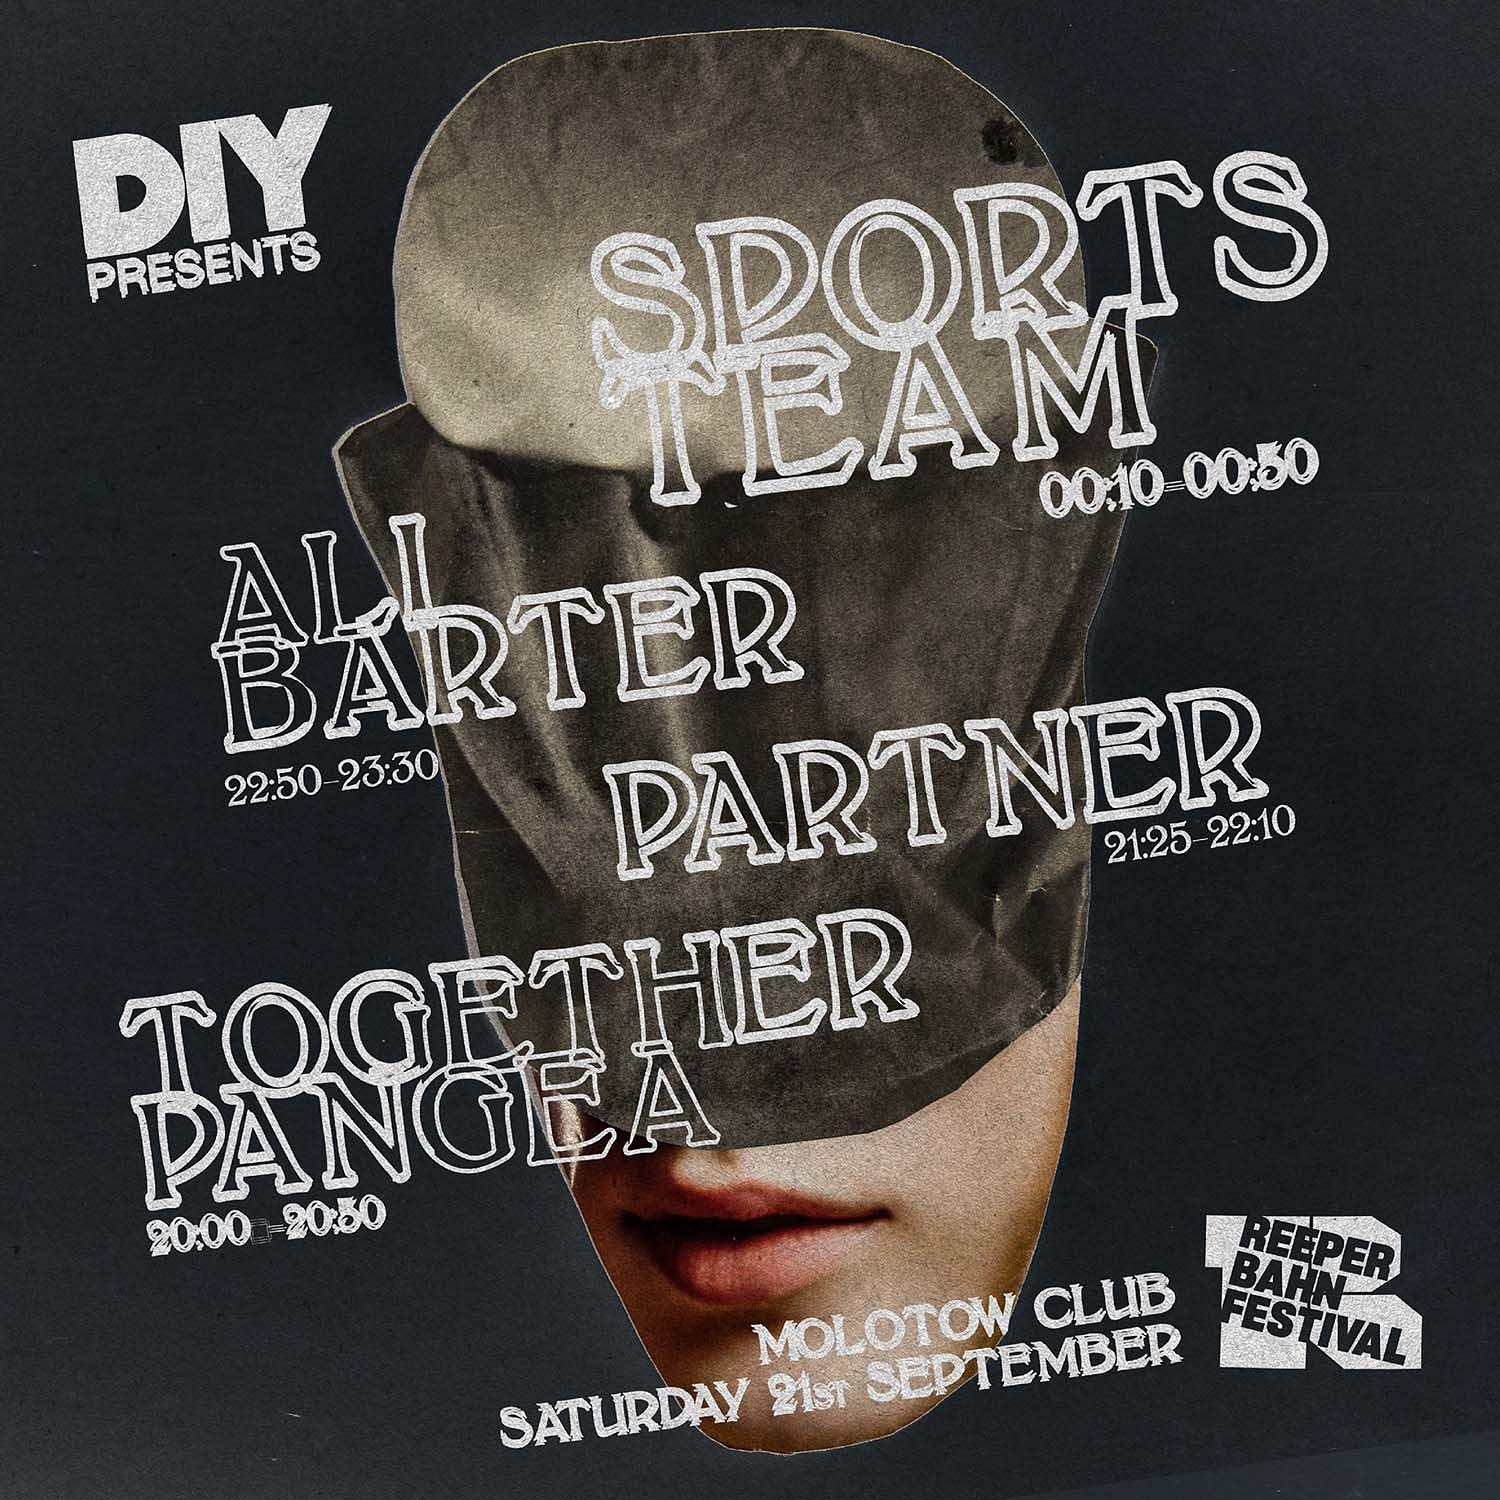 Sports Team, Ali Barter, Partner and Together Pangea to play DIY stage at Reeperbahn 2019